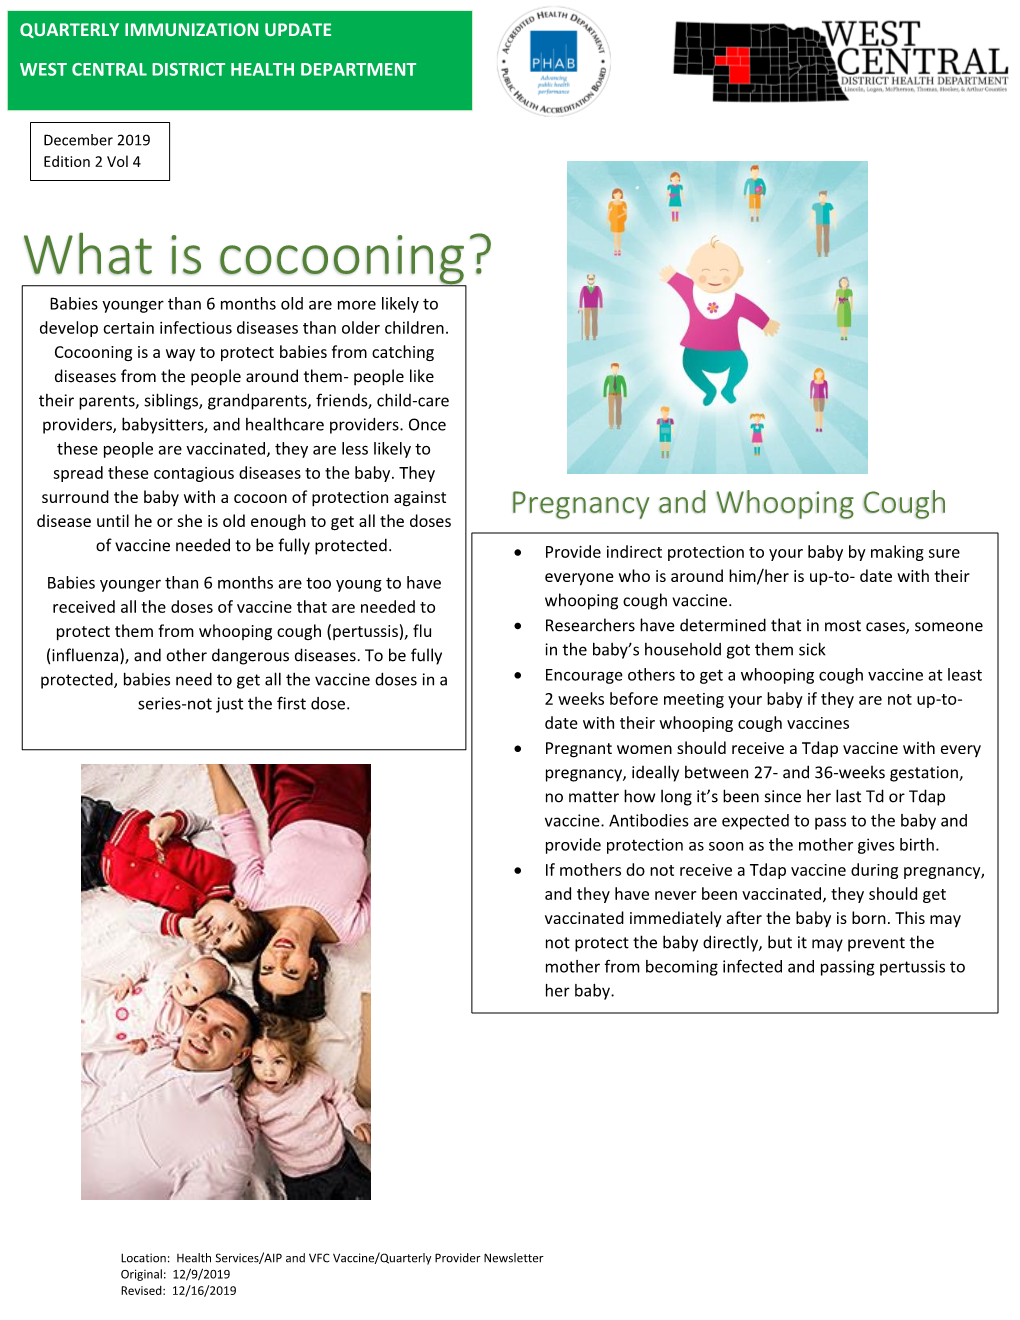 What Is Cocooning? Babies Younger Than 6 Months Old Are More Likely to Develop Certain Infectious Diseases Than Older Children